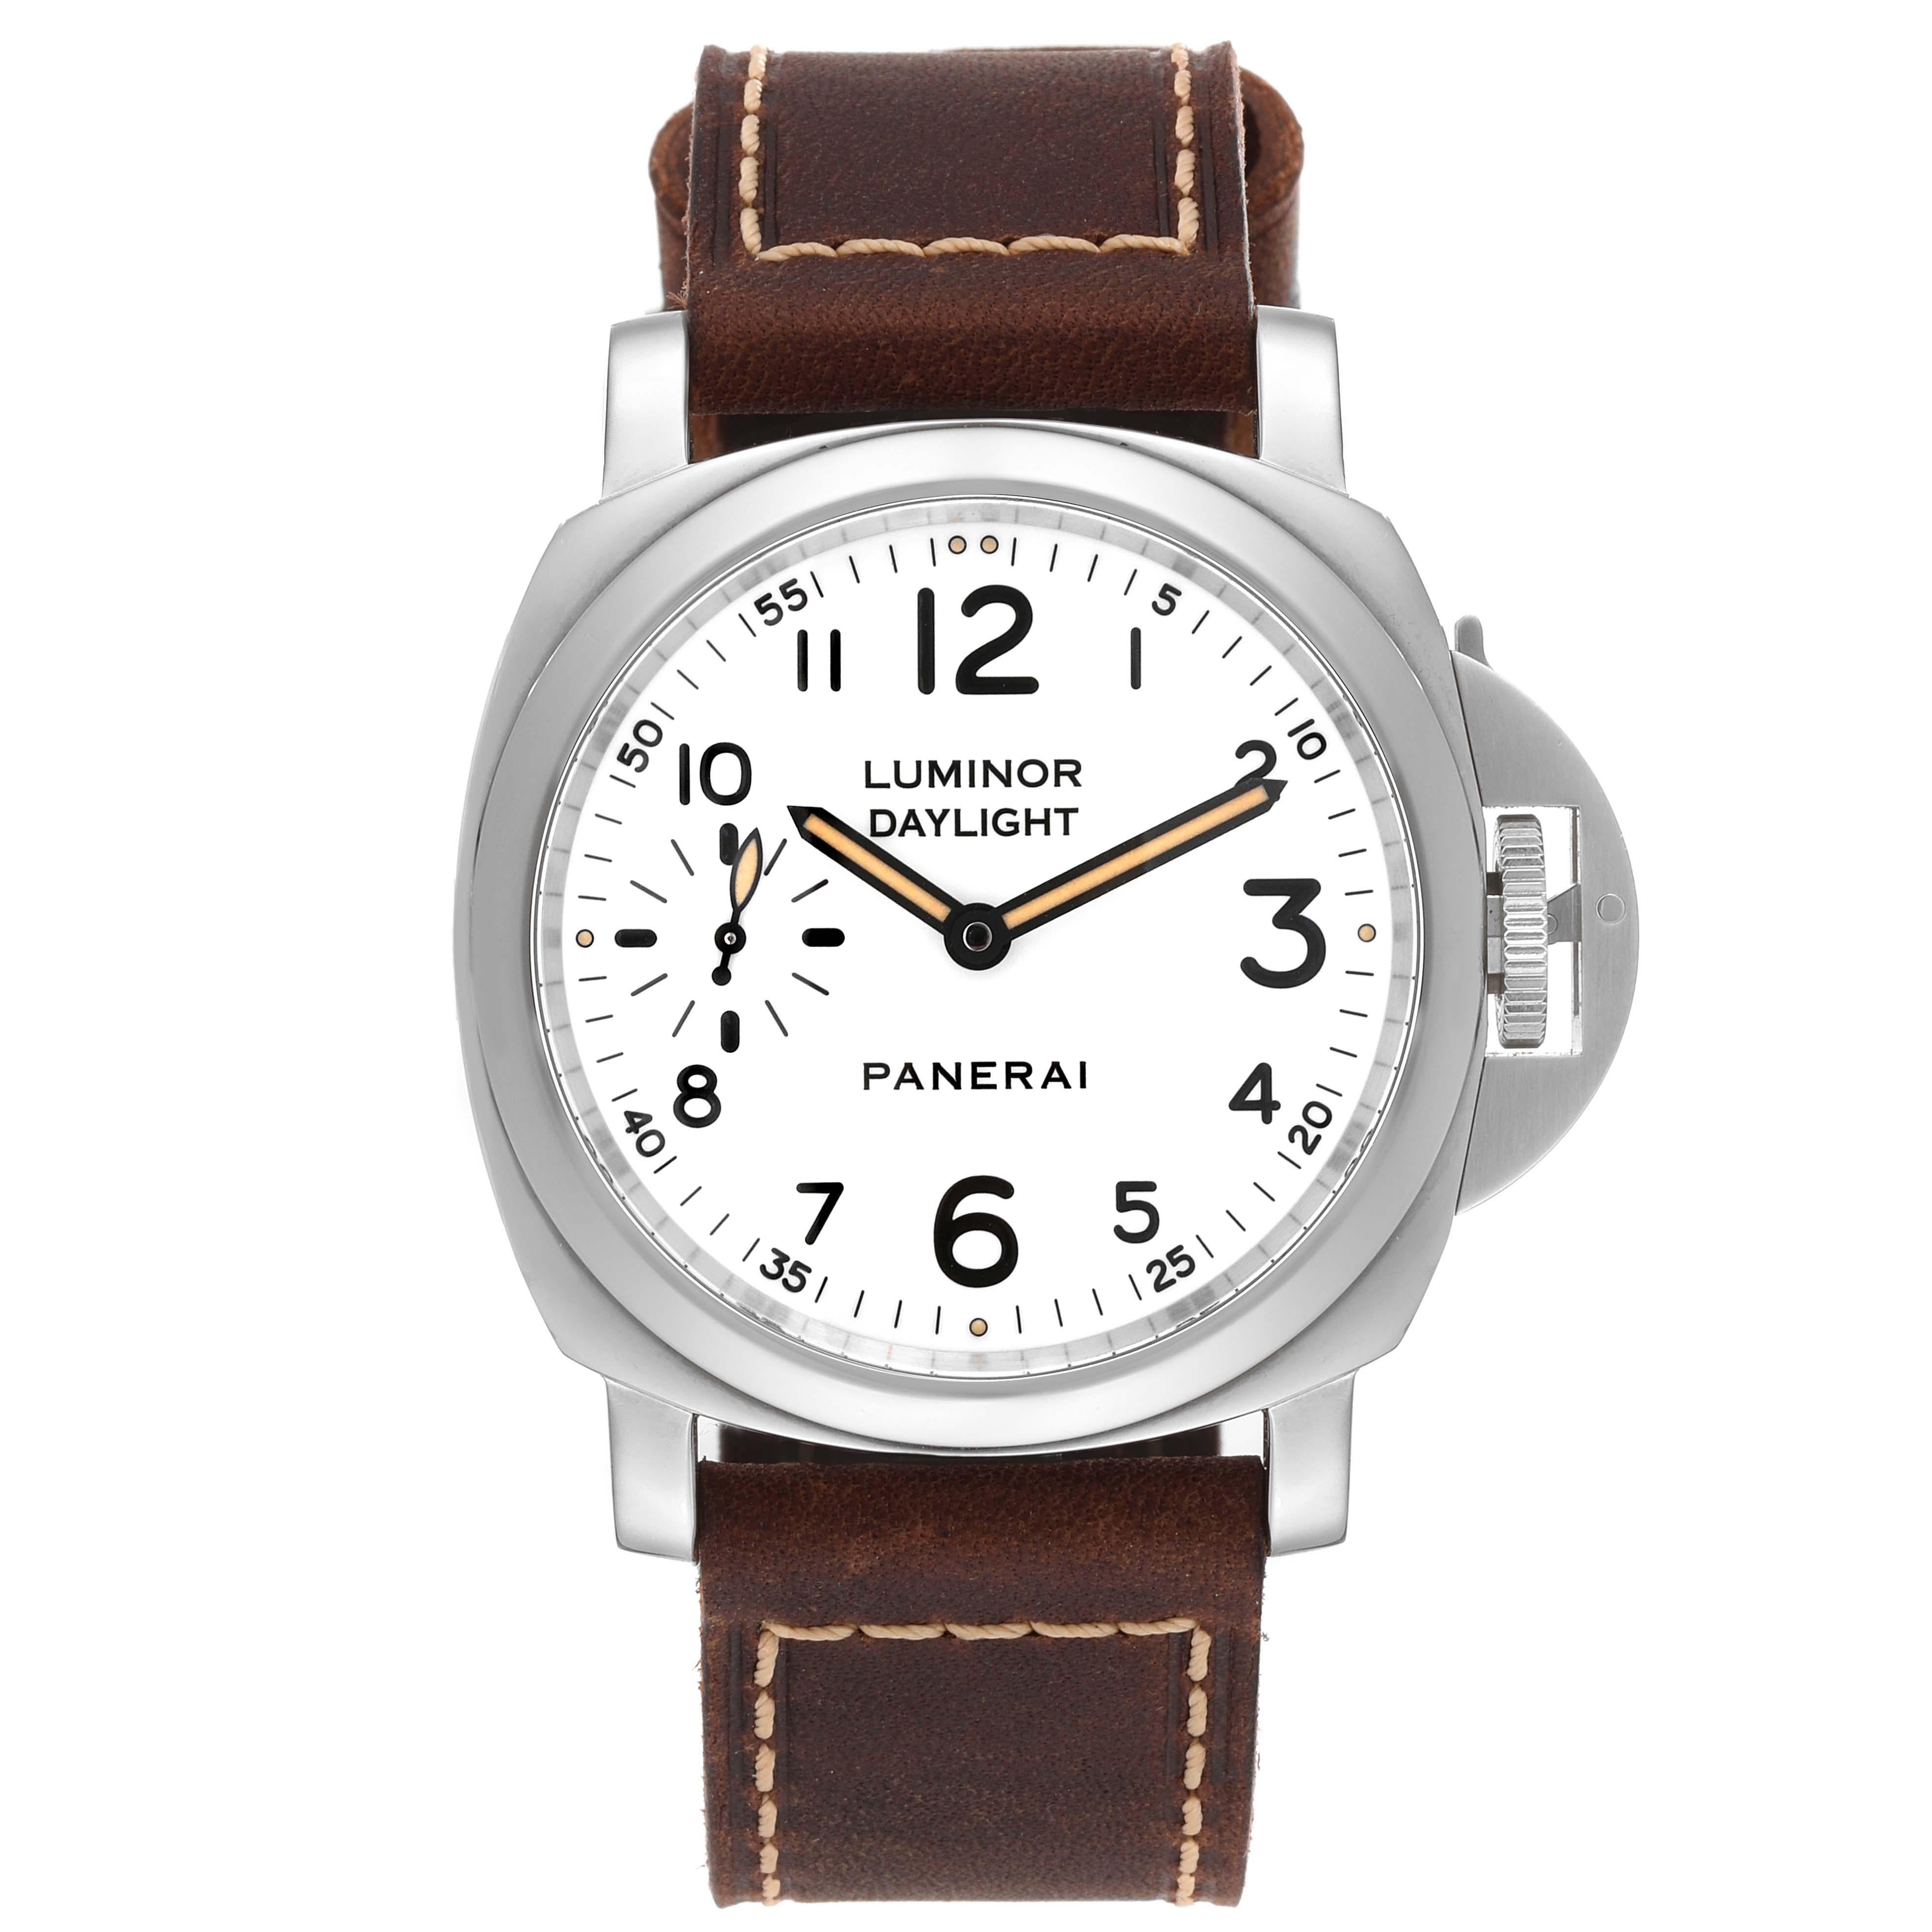 Panerai Luminor 8 Days Limited Edition Steel Mens Watch Set PAM00785 Box Papers. Manual winding movement. Power reserve 192 hours/8 days. Stainless steel and black DLC-coated steel cushion shaped case 44.0 mm in diameter. Panerai patented crown